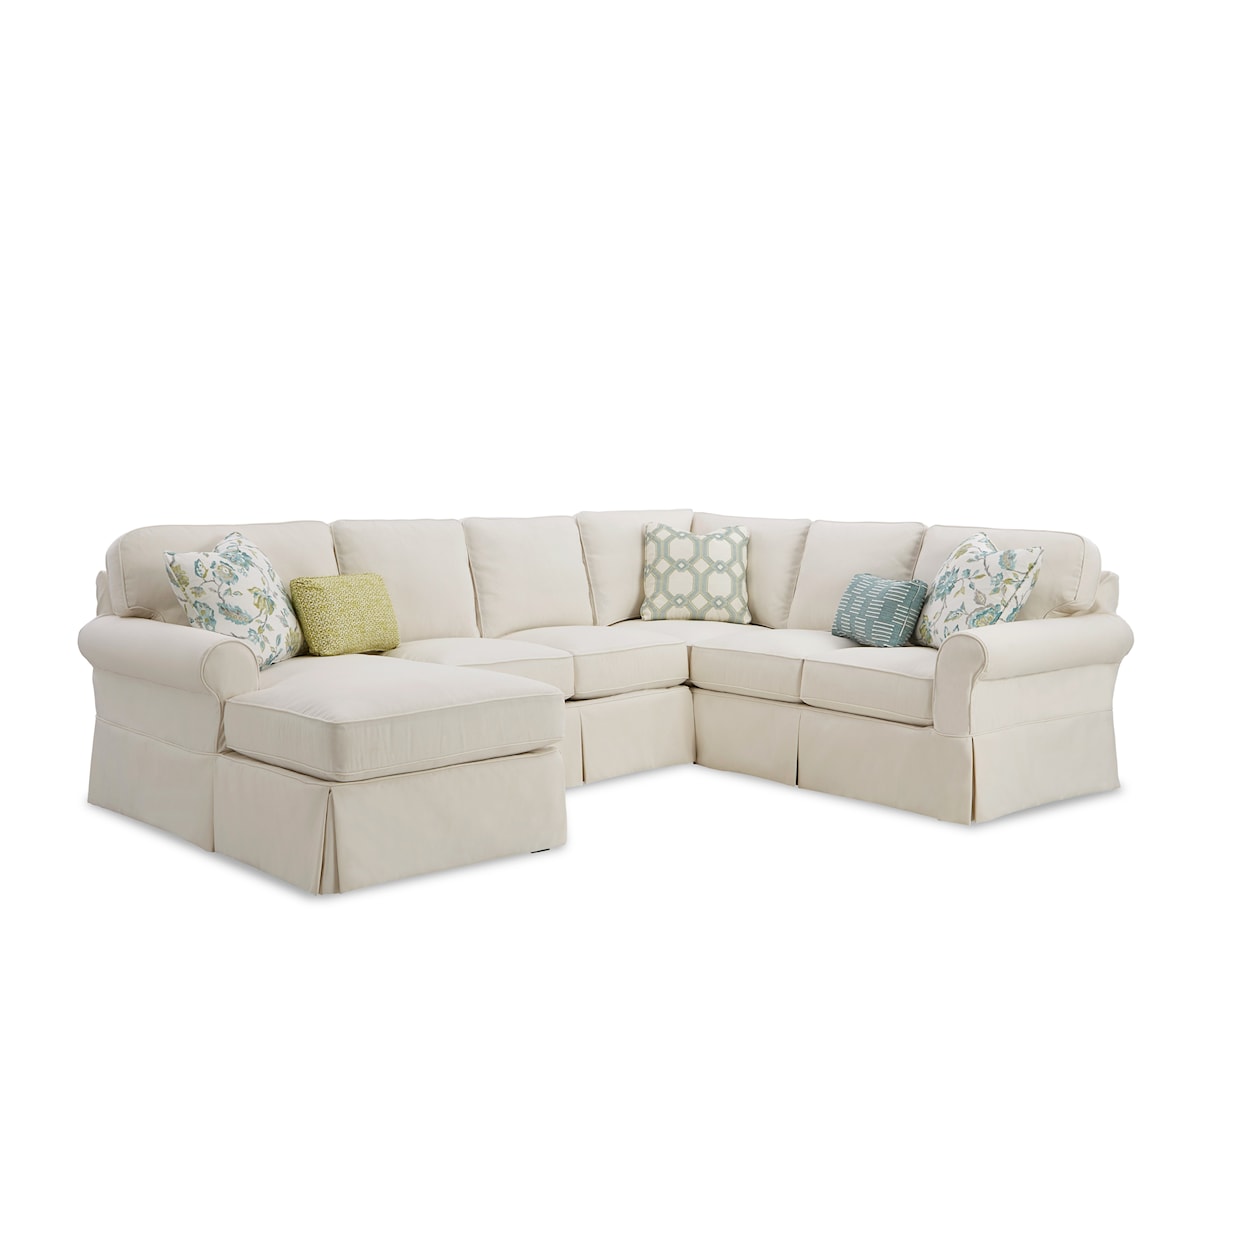 Craftmaster Alyssa 3-Pc Slipcover Sectional Sofa w/ LAF Chaise